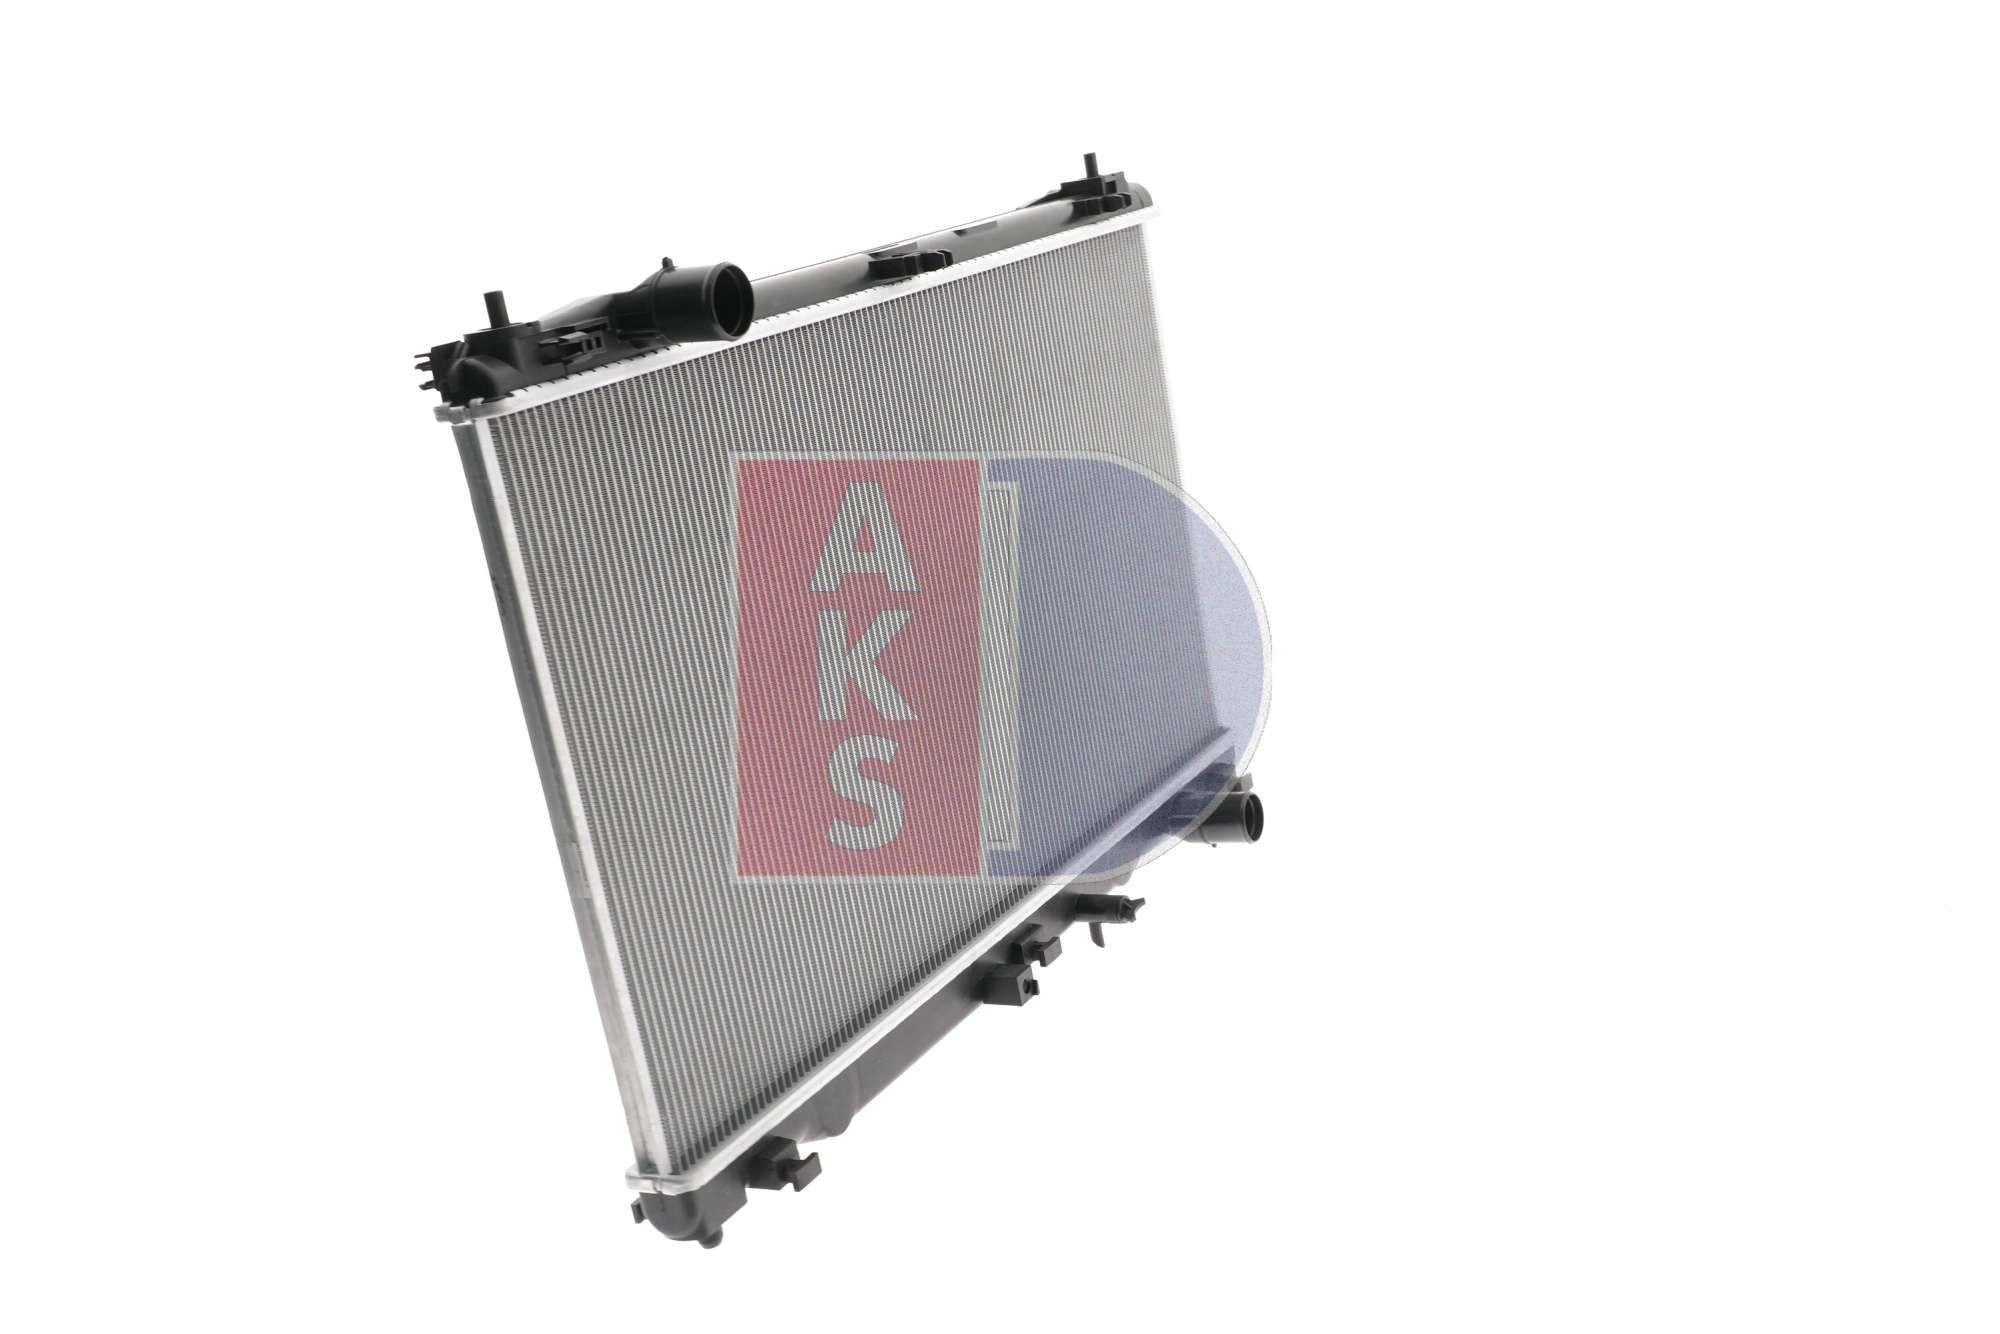 210287N Radiator 210287N AKS DASIS Aluminium, for vehicles with/without air conditioning, 400 x 708 x 16 mm, Brazed cooling fins